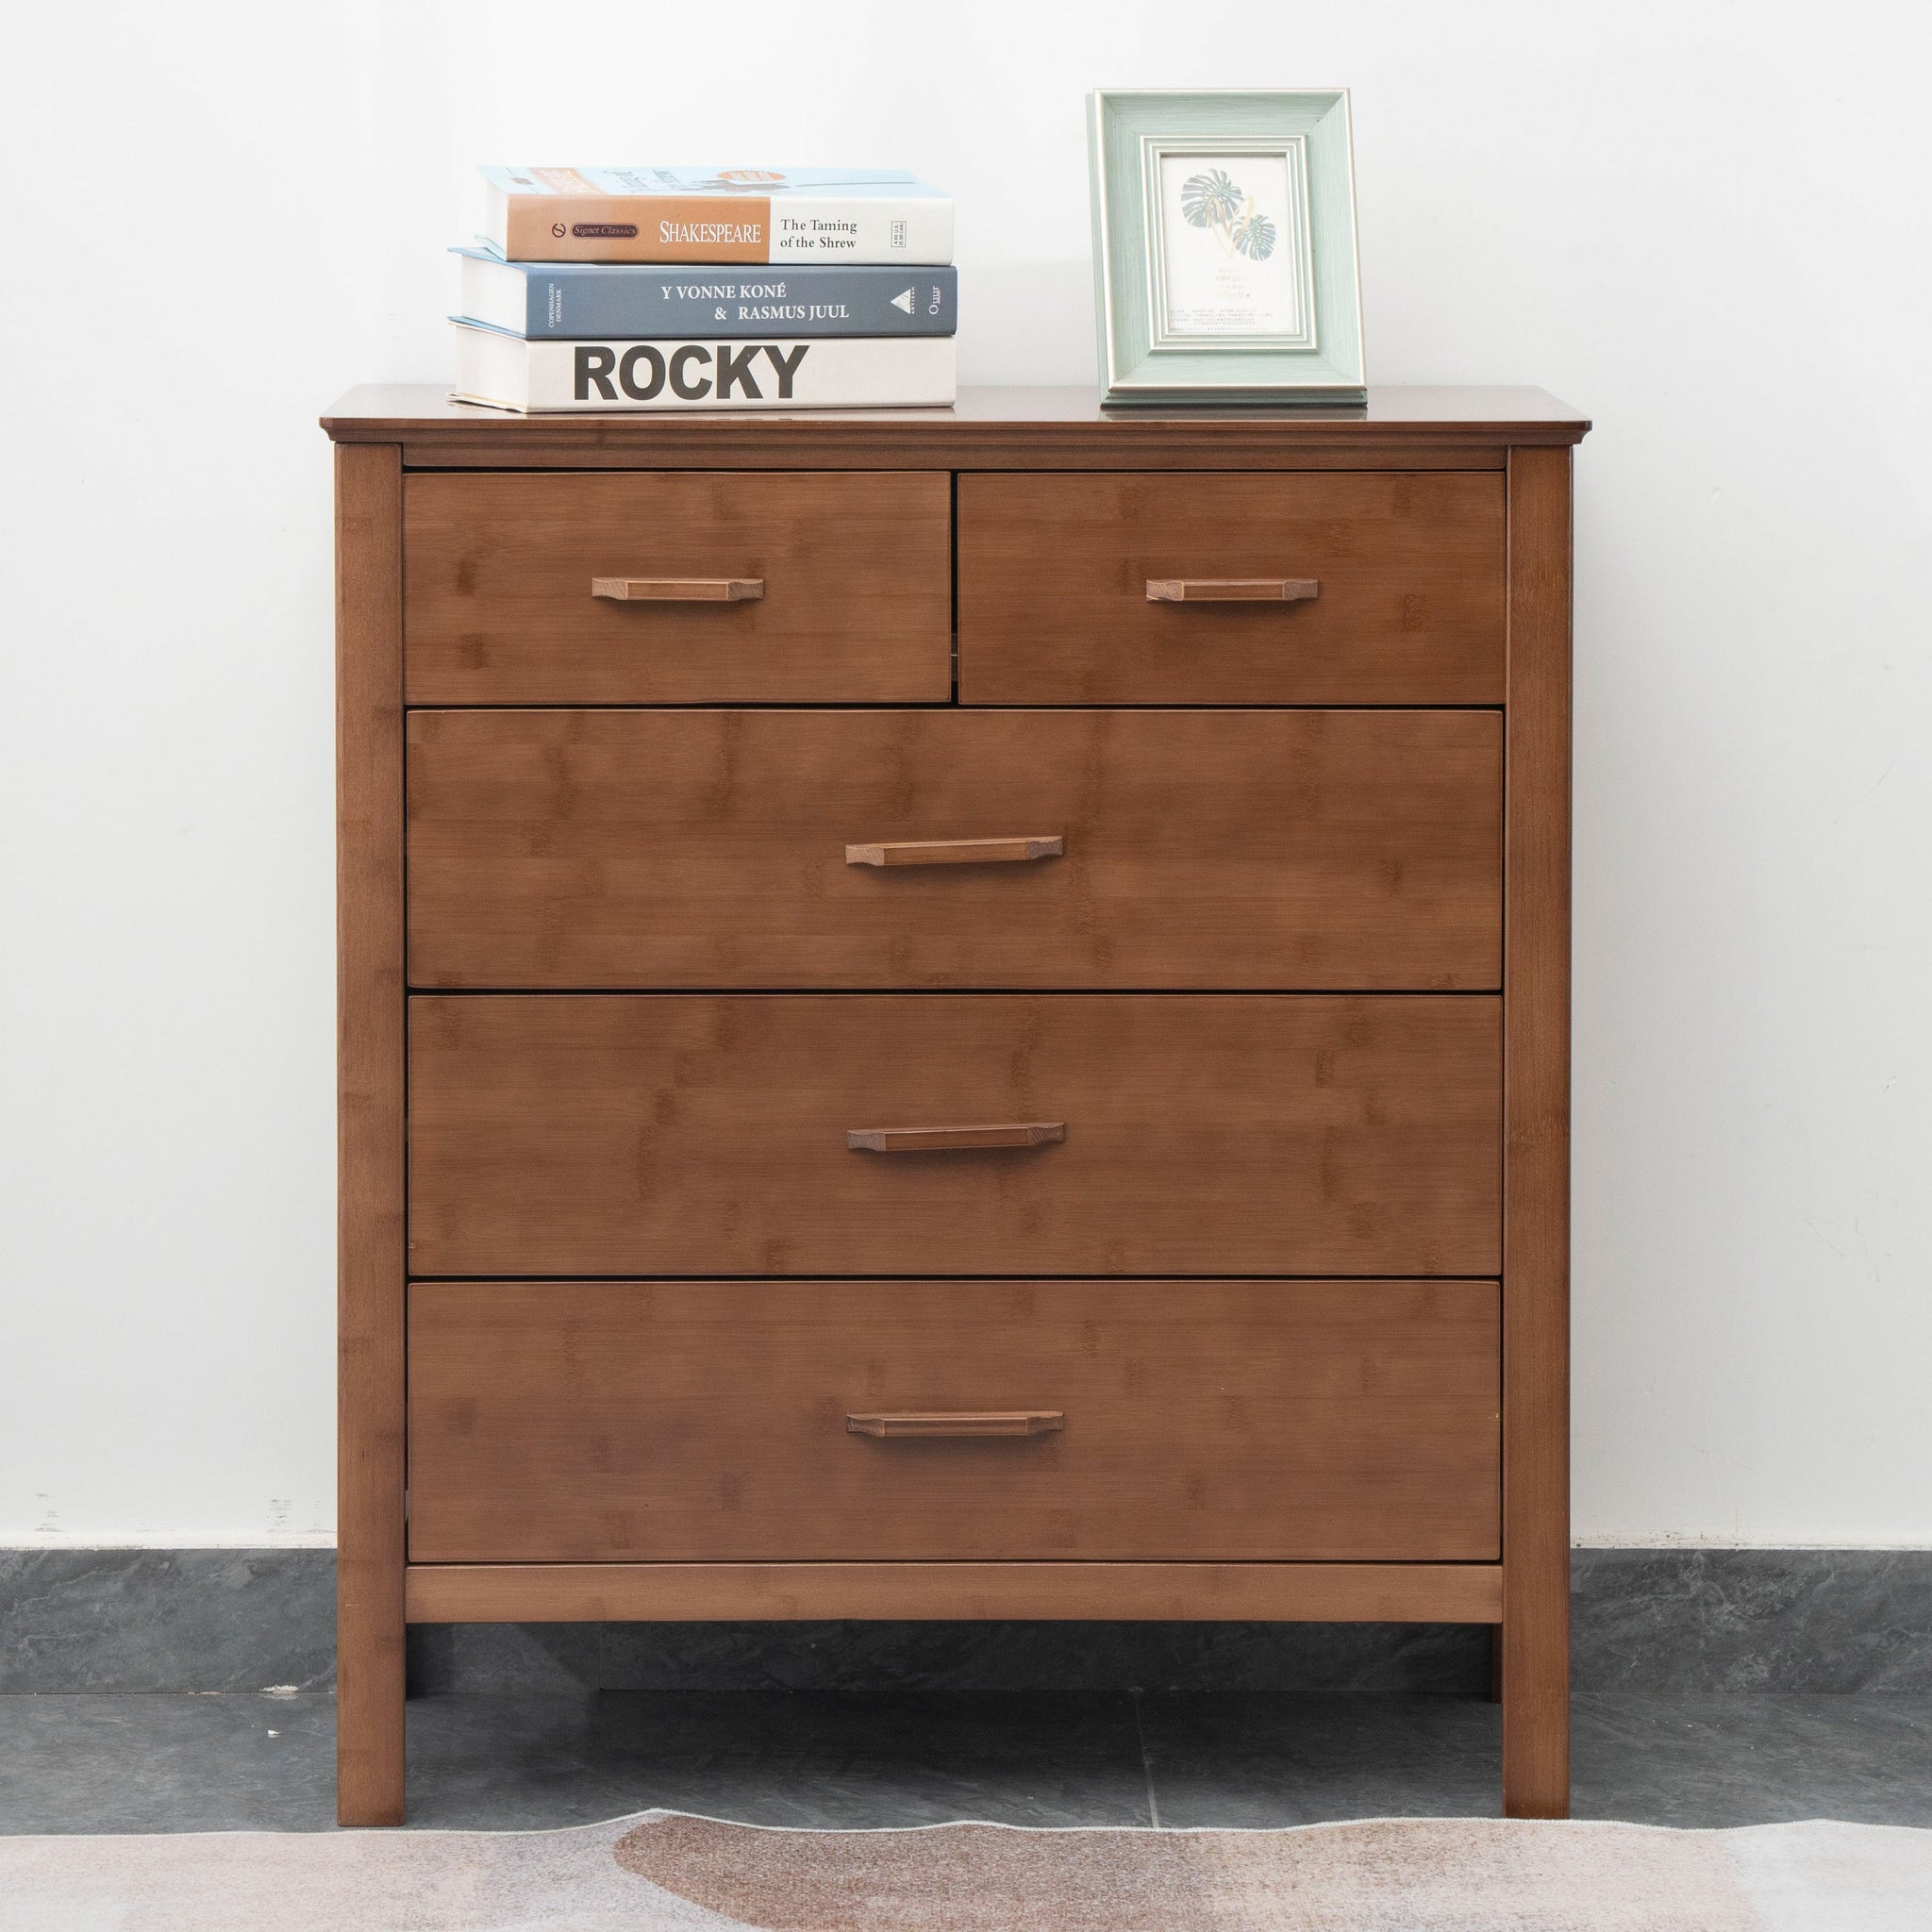 Bamboo Dresser Chest with Drawers (2 sizes)